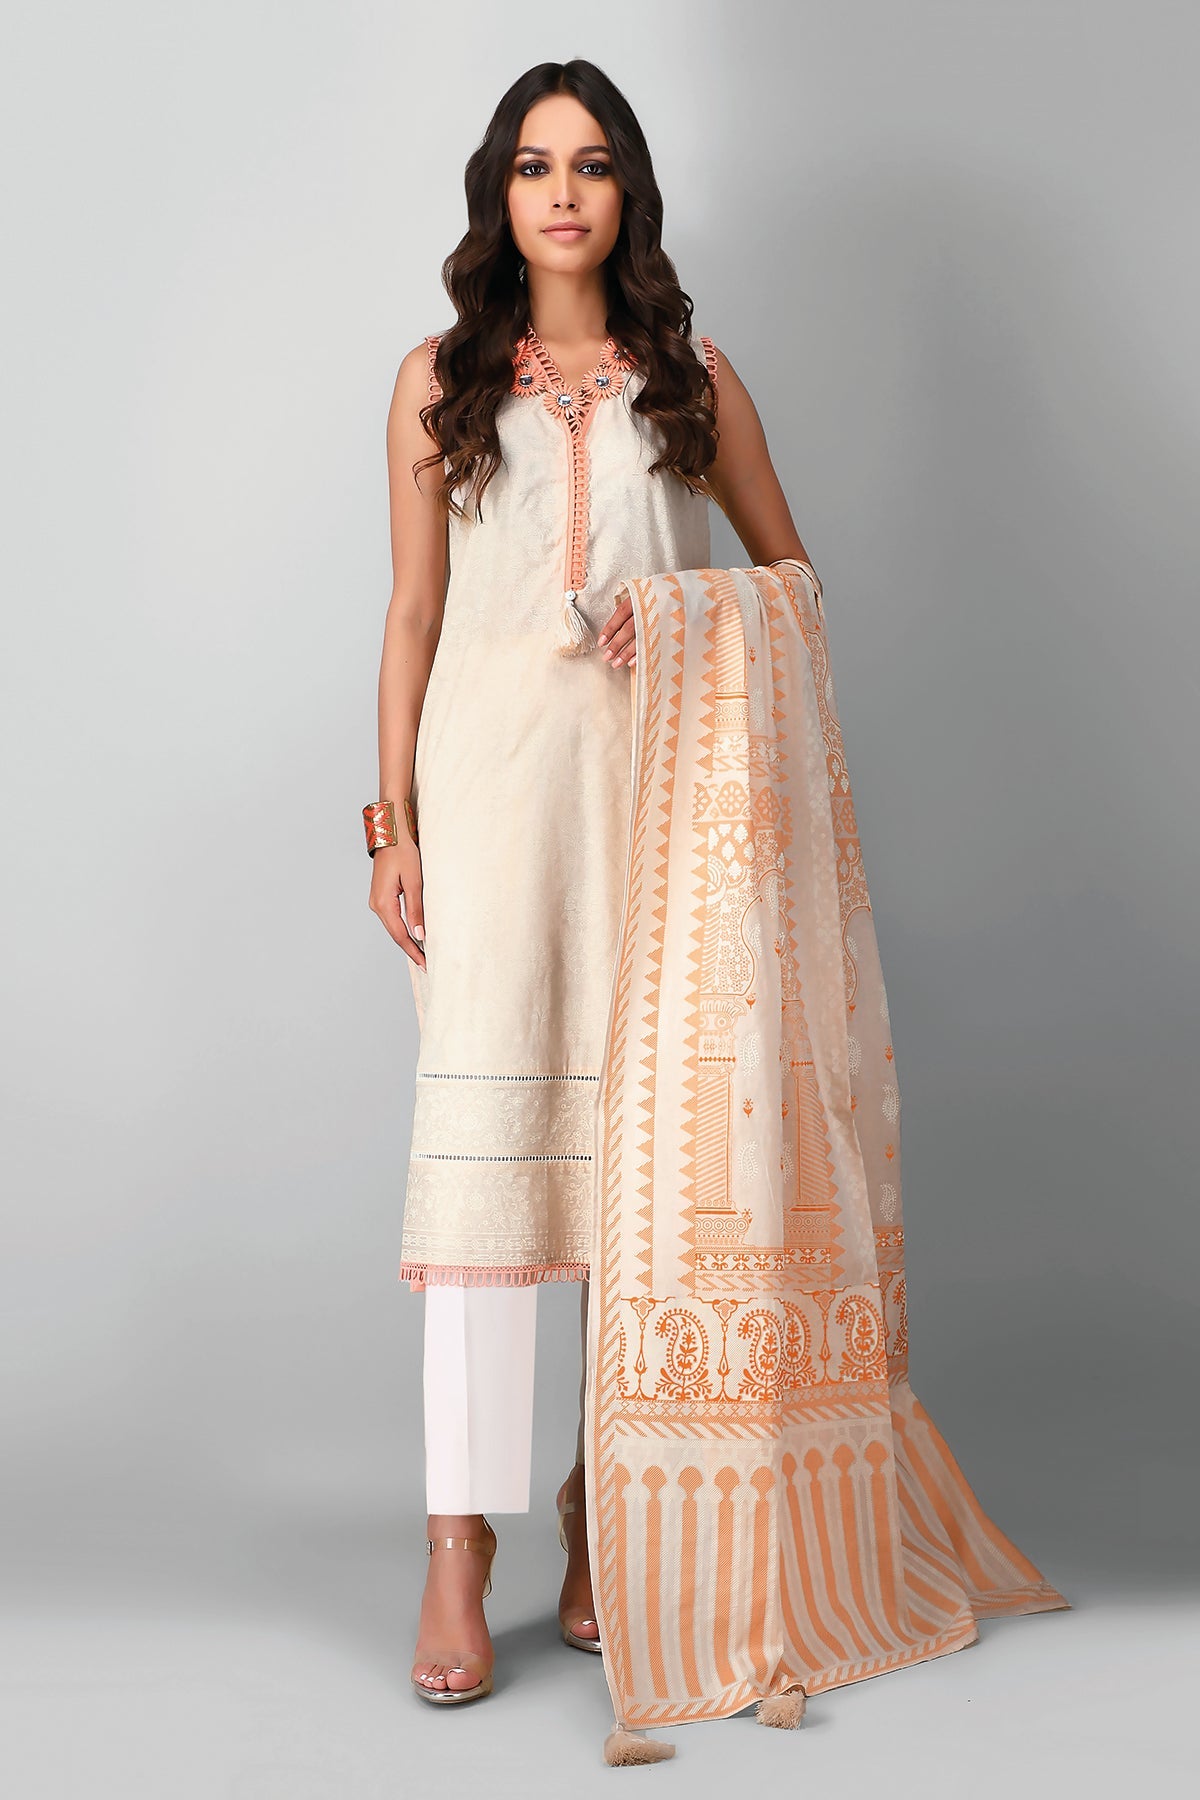 Buy Baana Women's Linen Khadi Design with Candle Print Suit (Grey, Free  Size) at Amazon.in